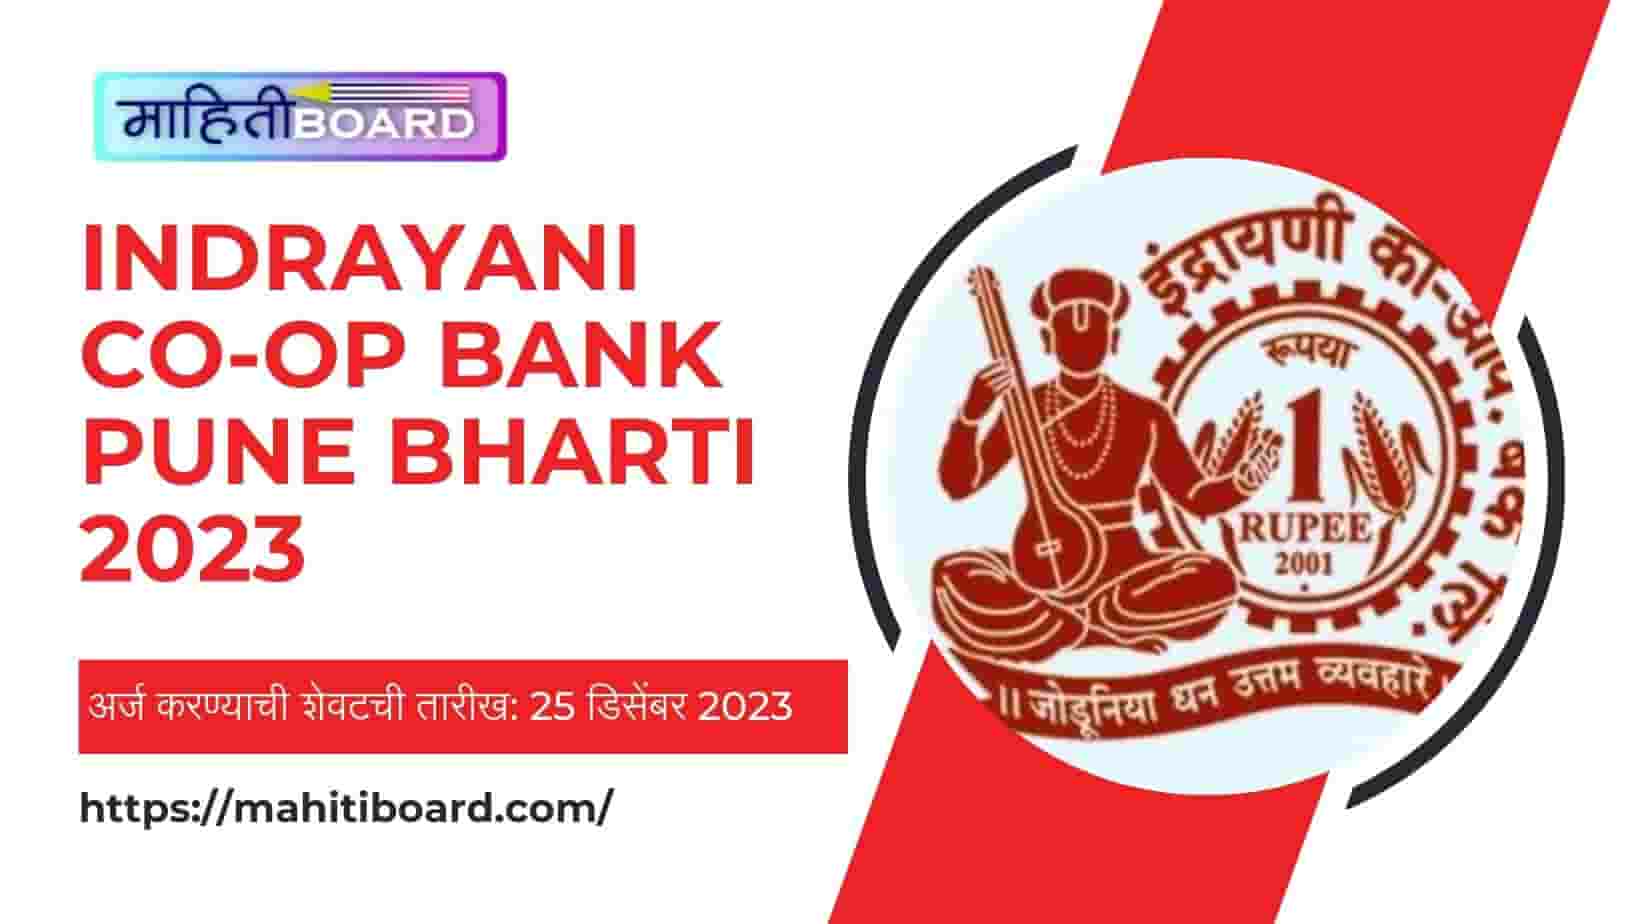 Indrayani Co-Op Bank Pune Bharti 2023